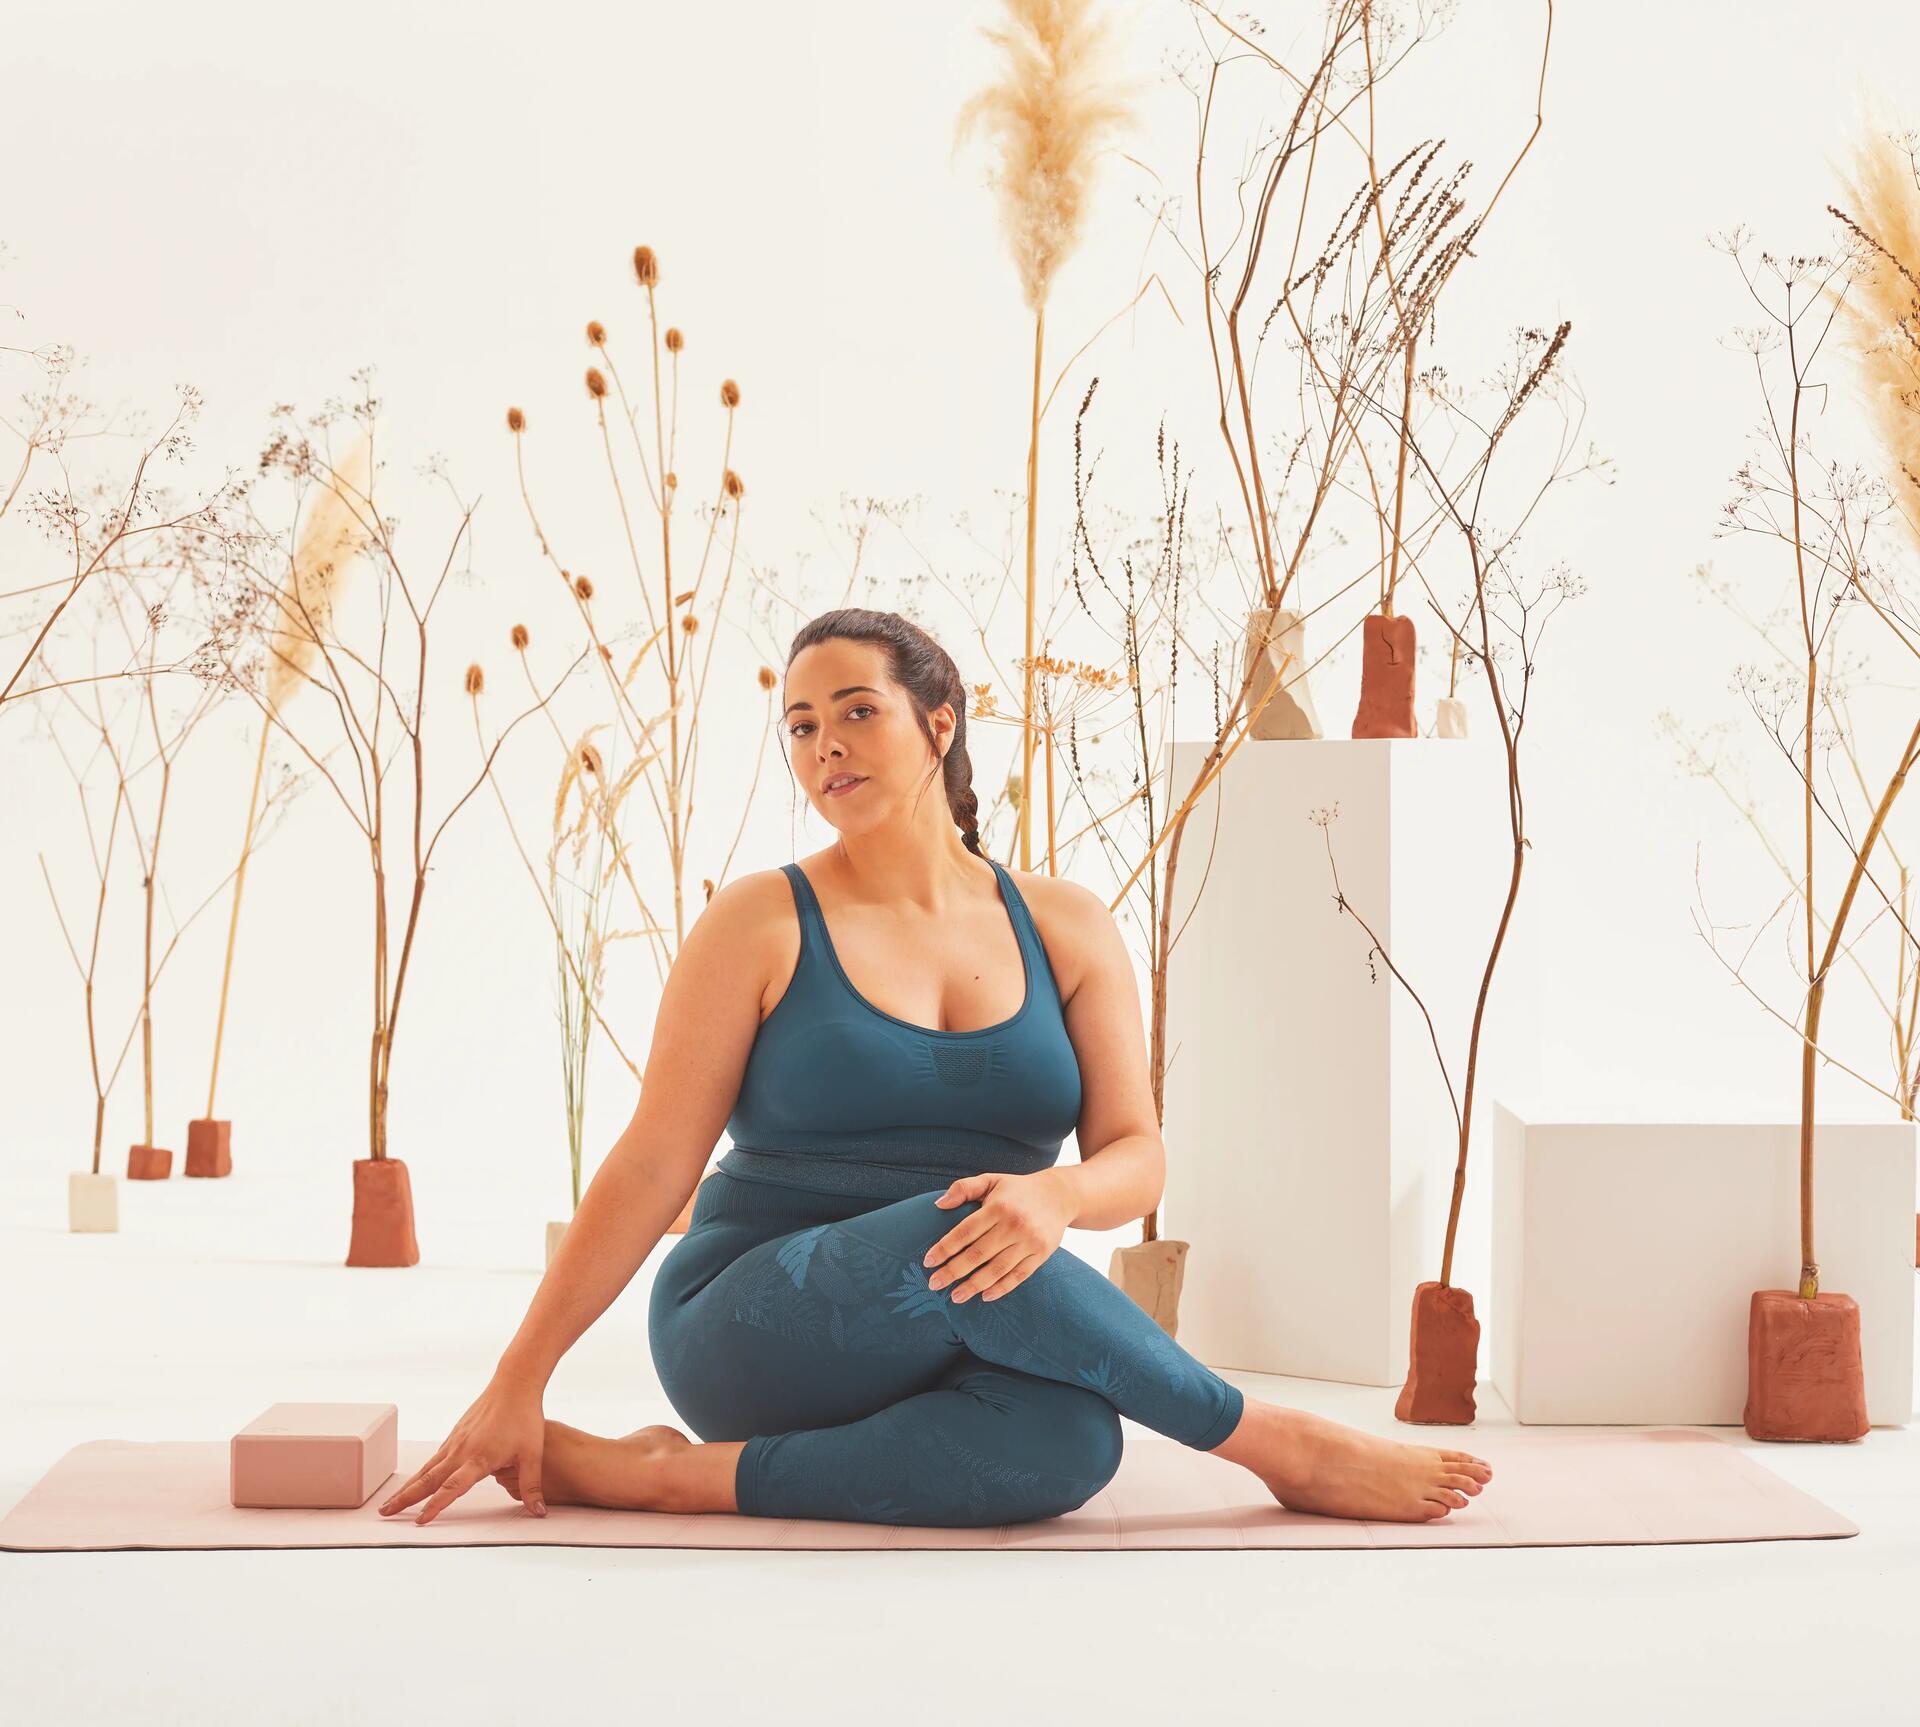 Decathlon UK - Yoga is a practice that provides both physical and mental  benefits. Let's explore some of the ways yoga can positively impact your  body, and improve your mental health and